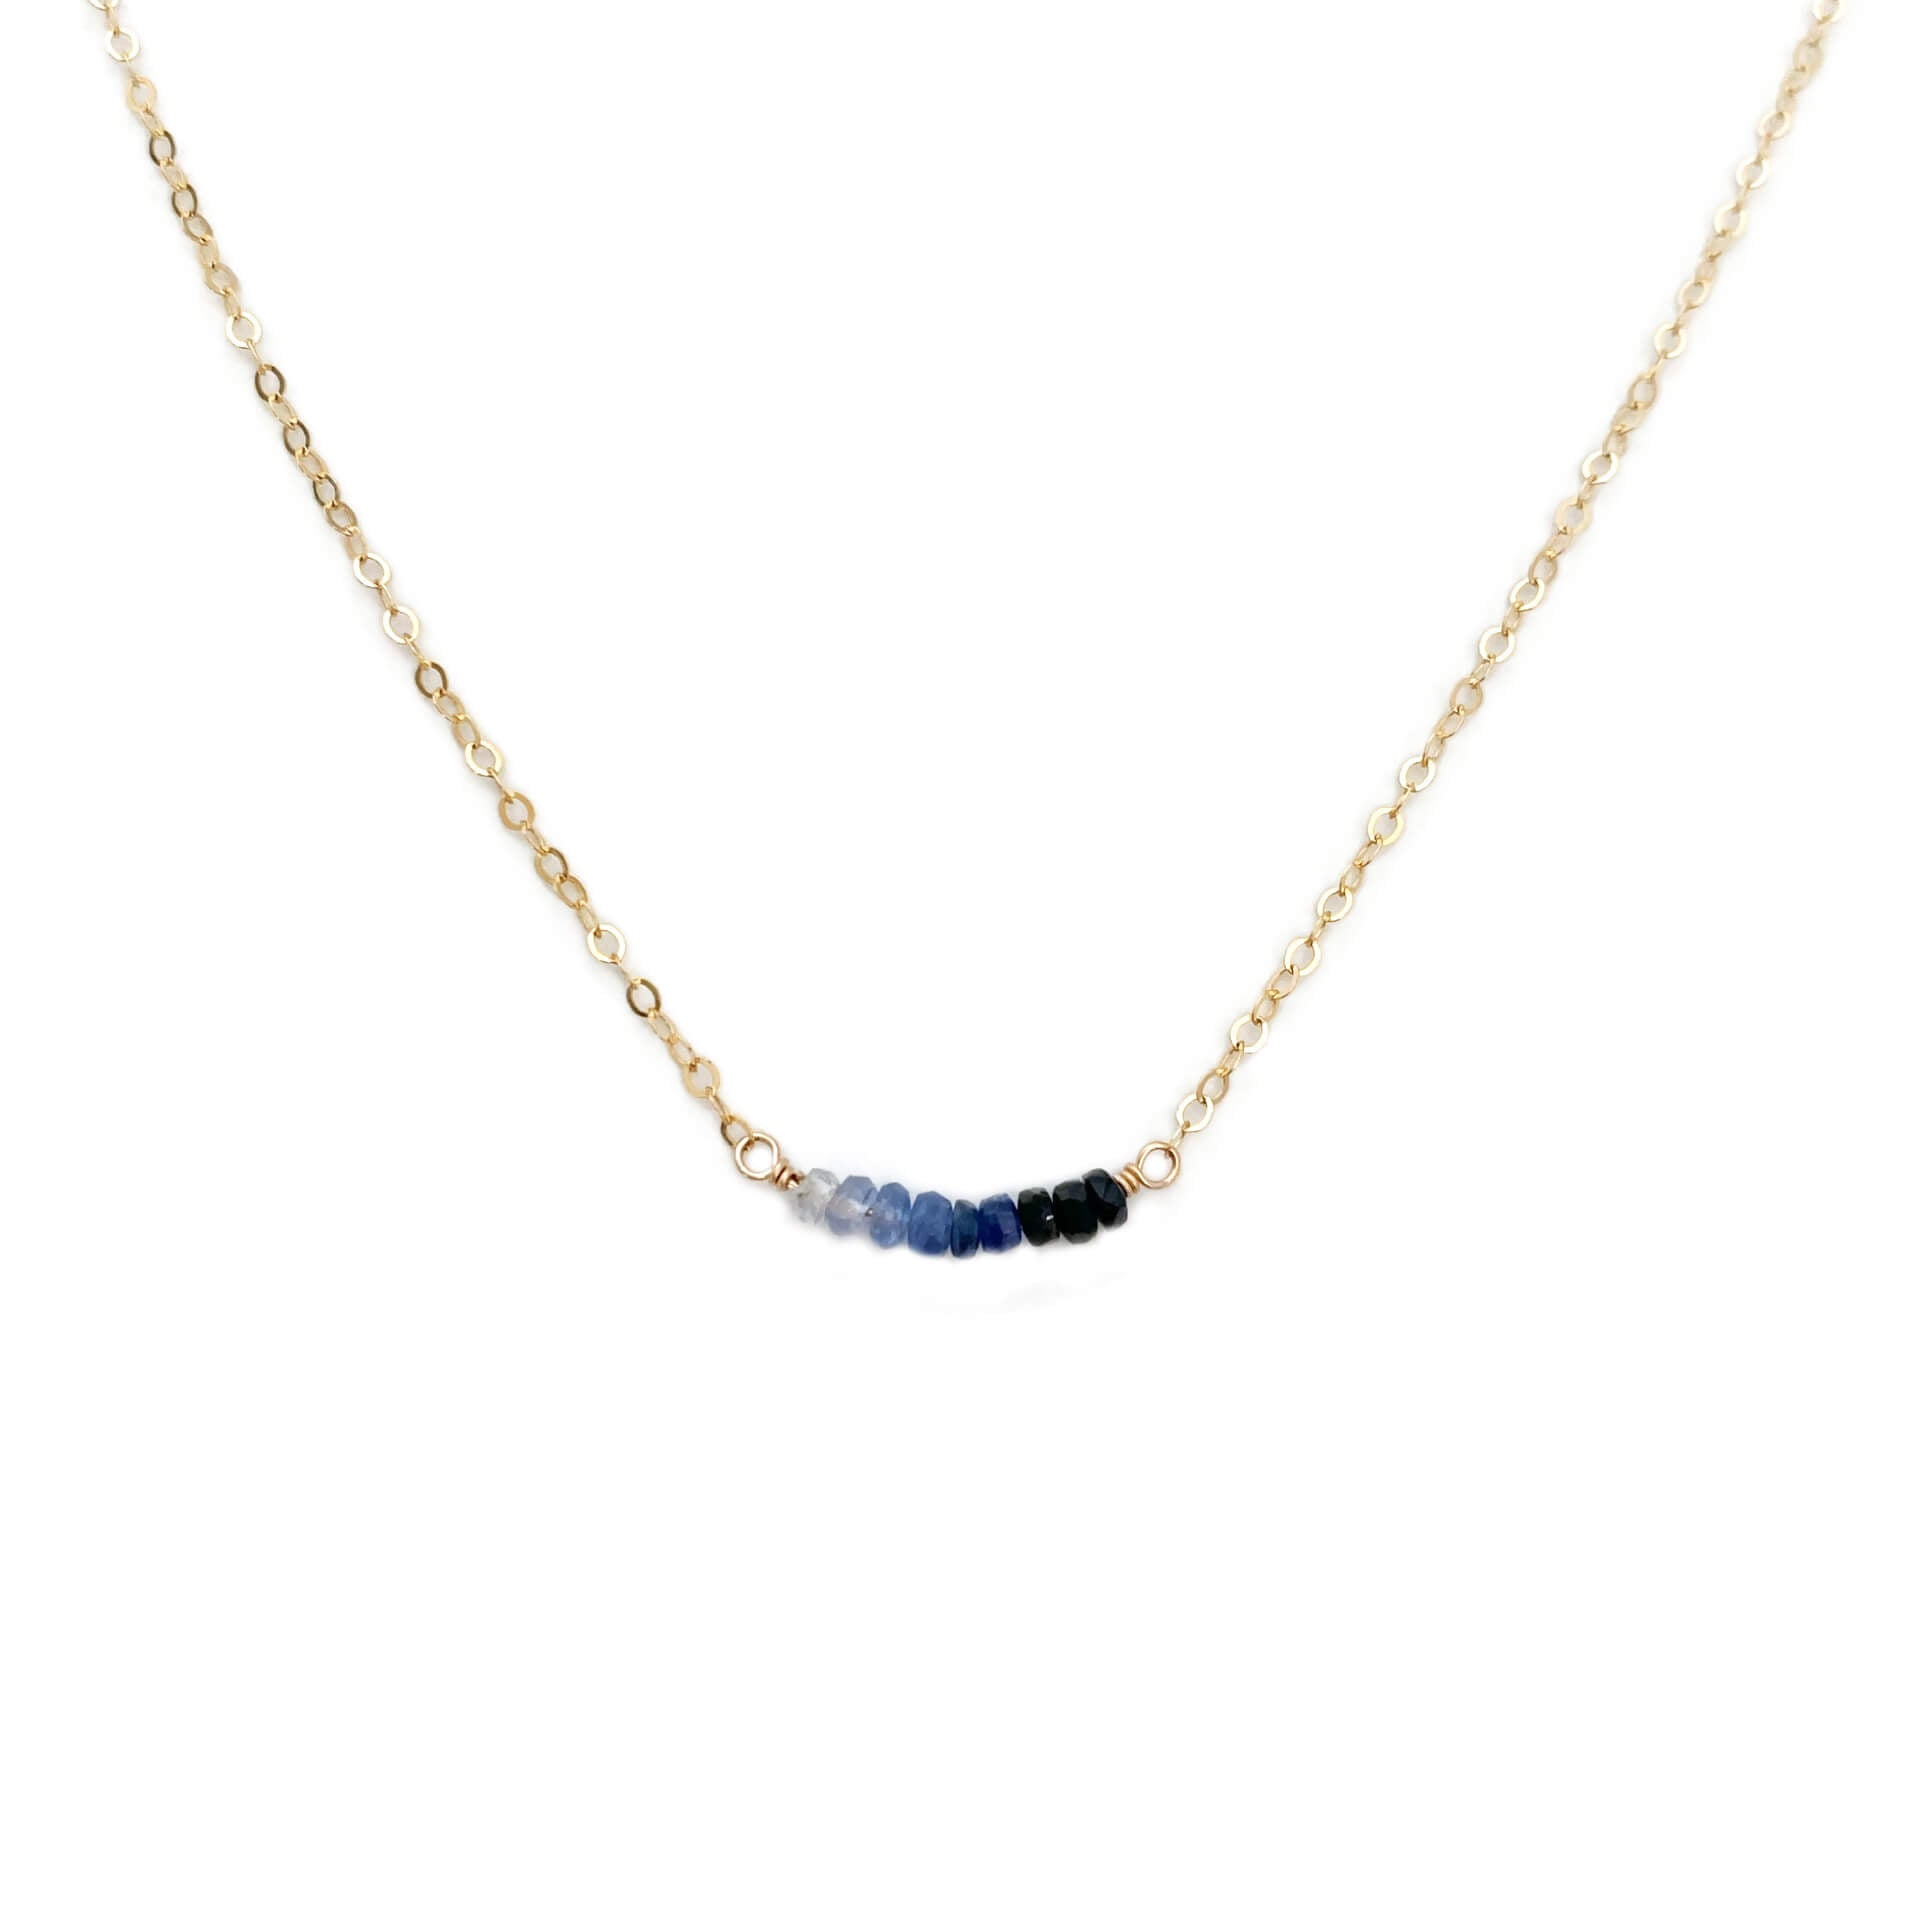 Blue Sapphire Beaded Necklace, 4.5-6.5mm Sapphire Faceted Rondelle Bead  Necklace, Multi Strand 5 Layer Necklace With Adjustable Dori 1518 - Etsy  Norway